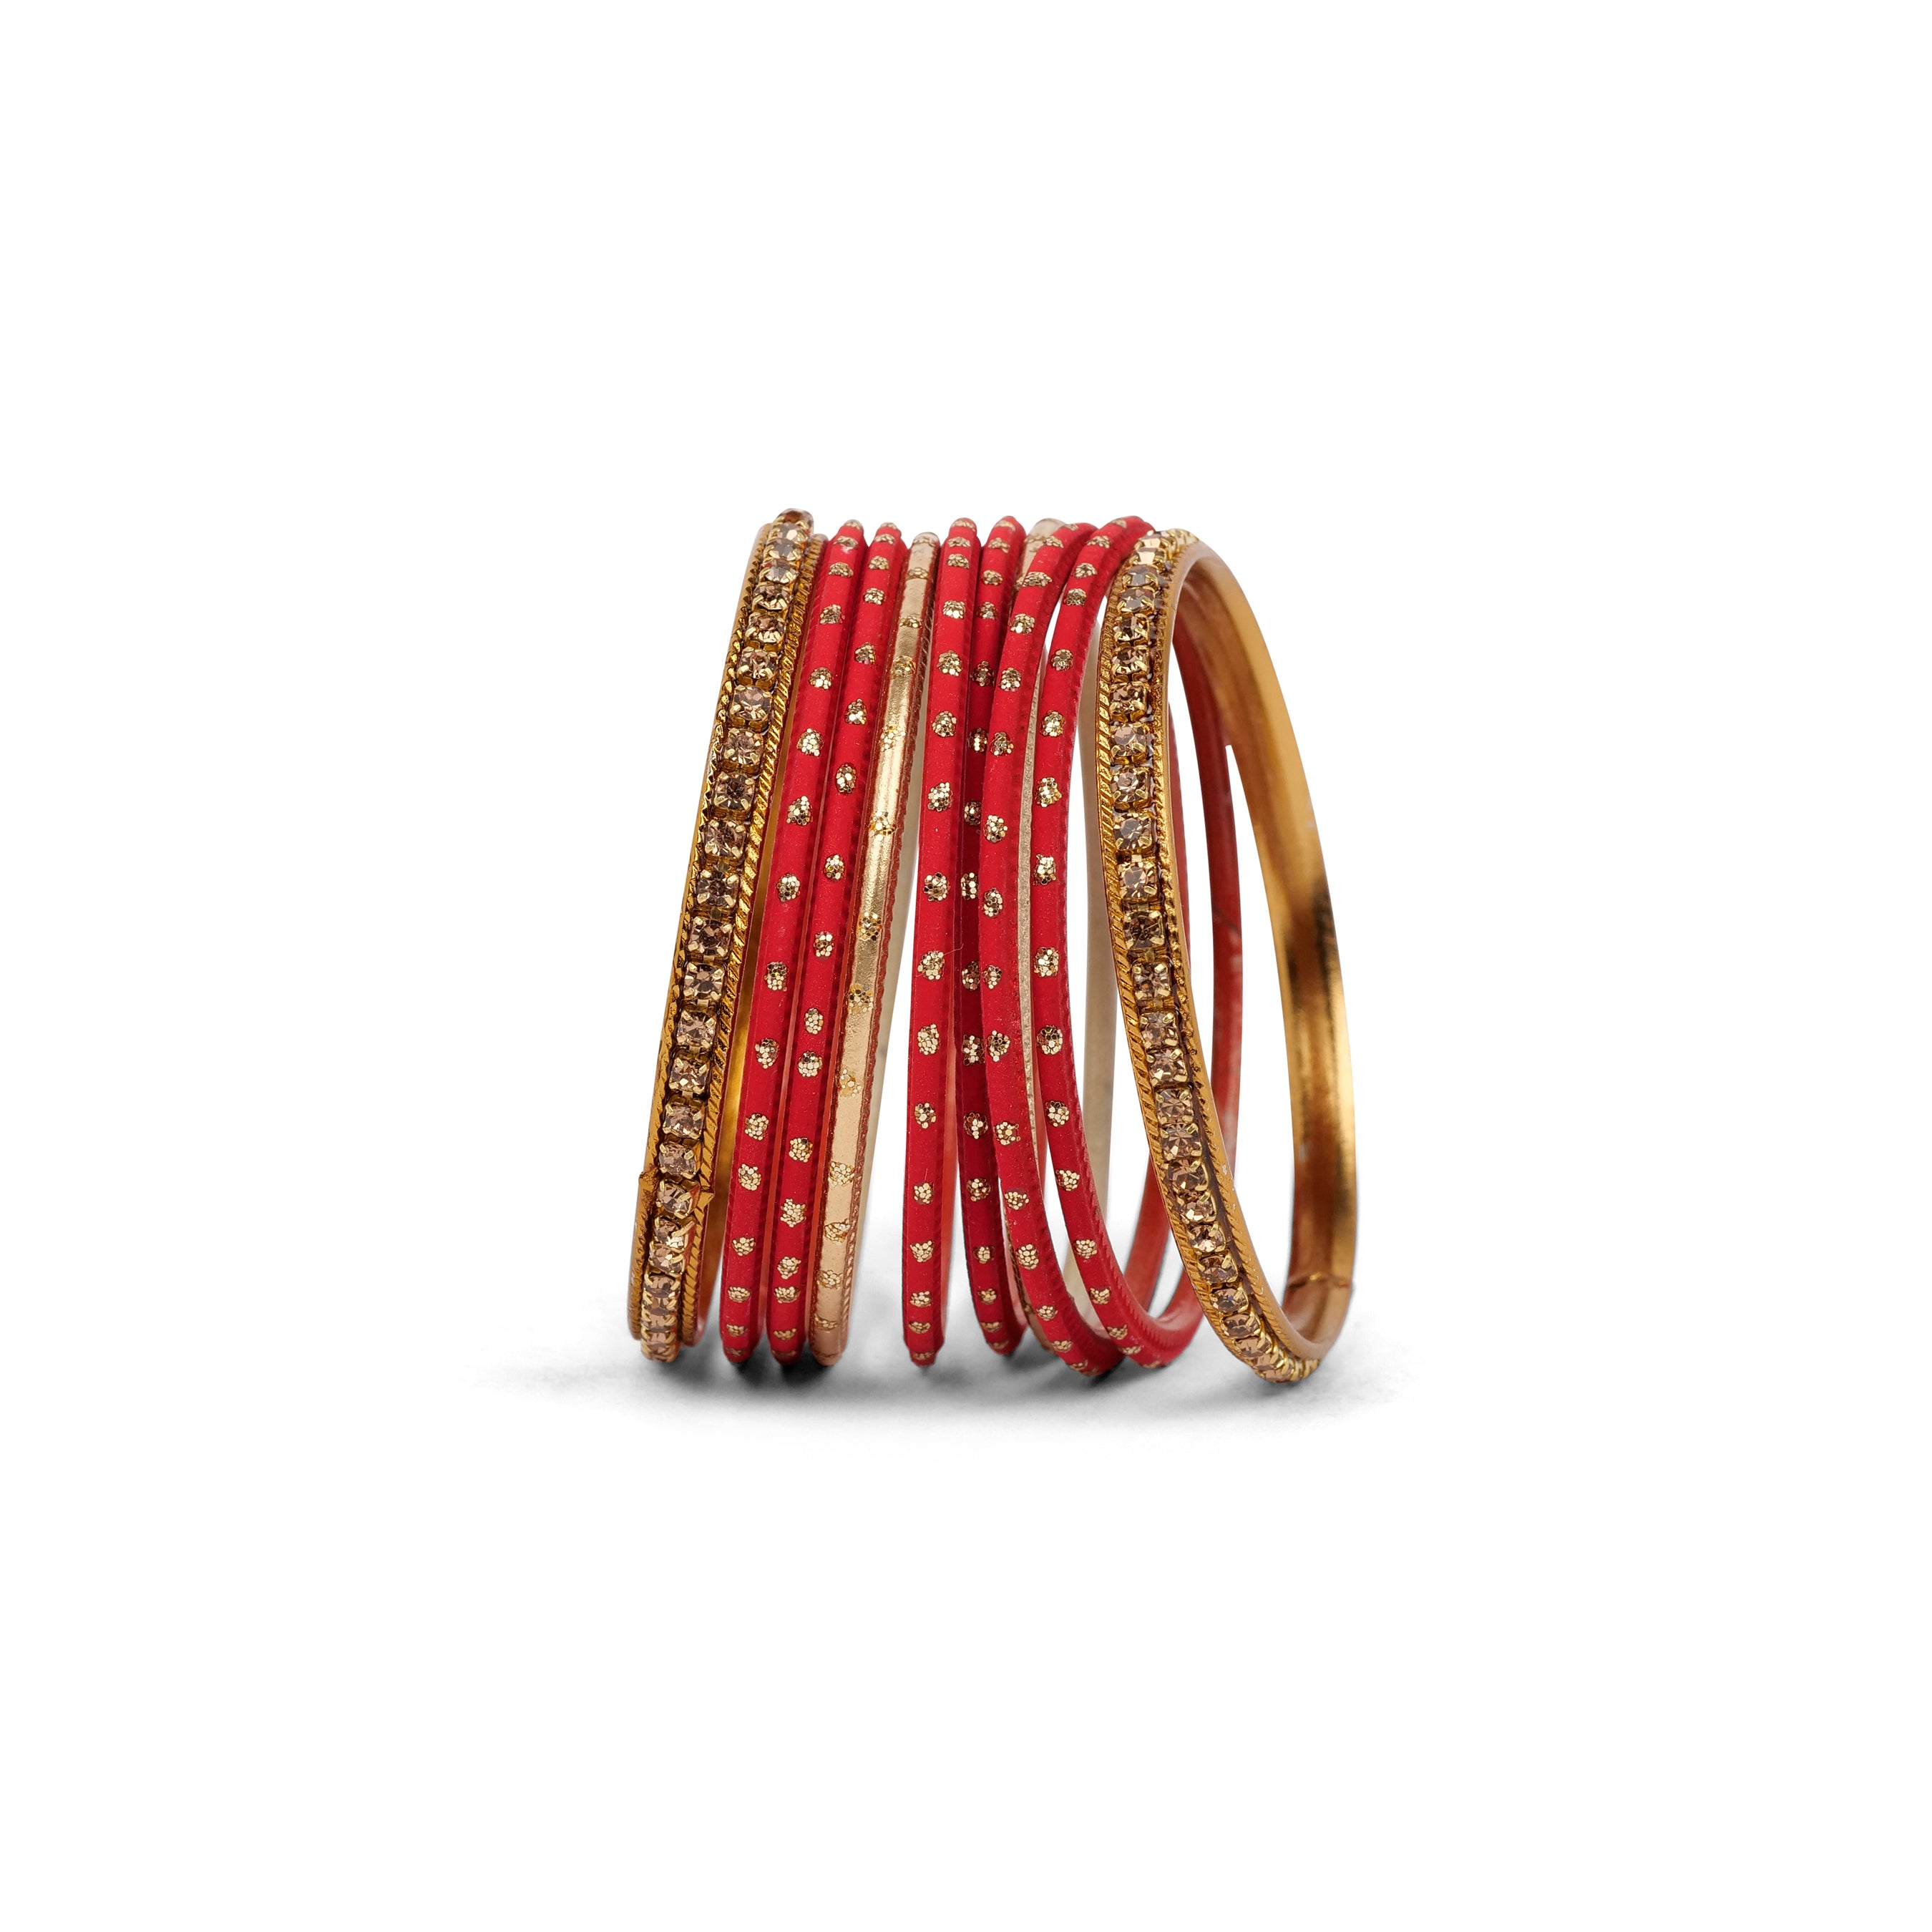 Children's Bangle Set in Red and Antique Gold